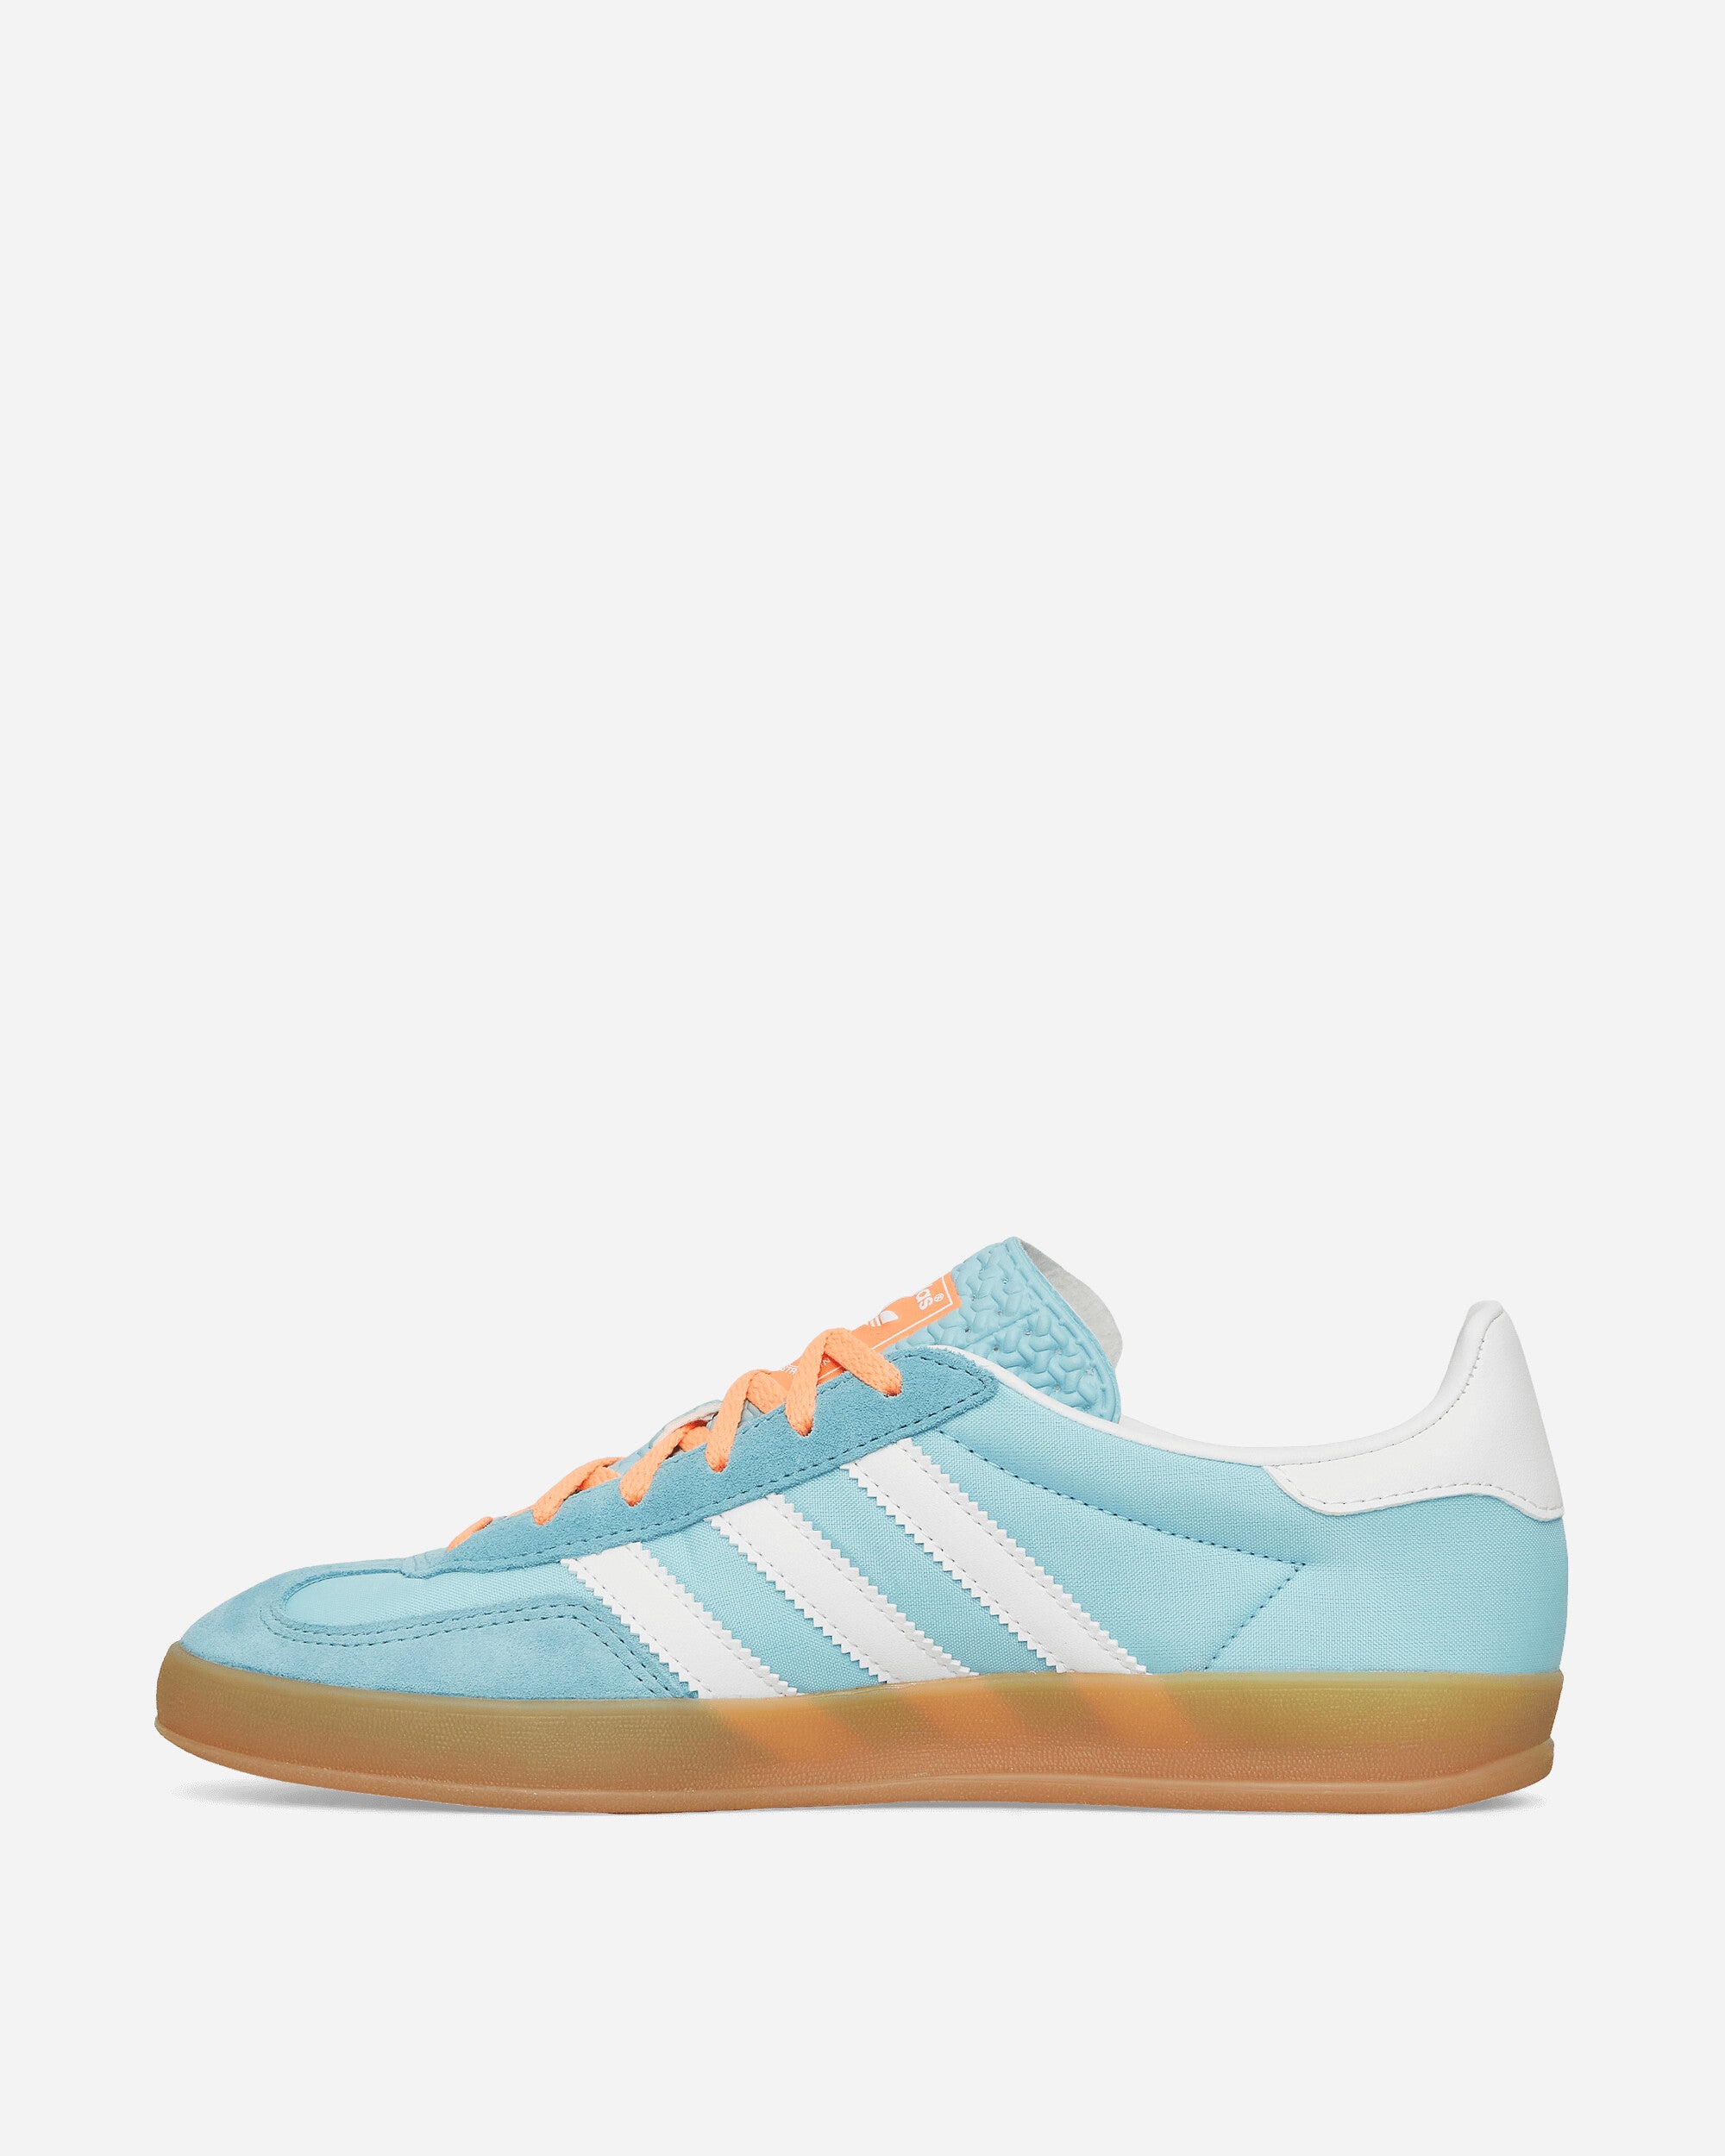 adidas Gazelle Indoor Preloved Blue/Ftwr White Sneakers Low HQ9017 001